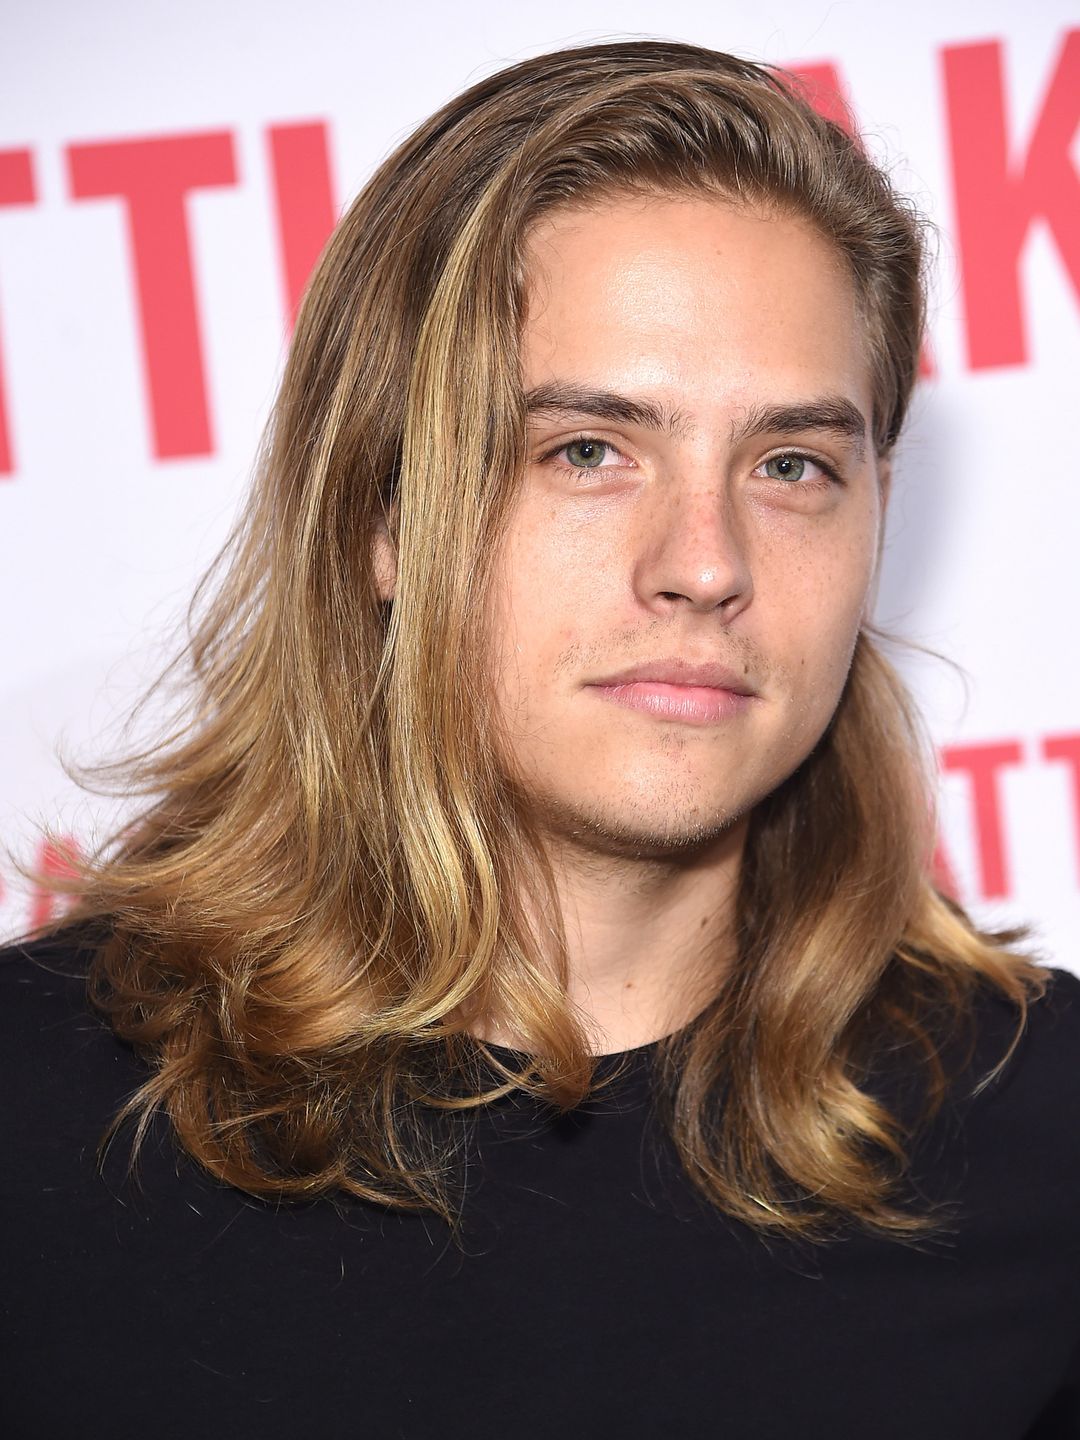 Dylan Sprouse biography